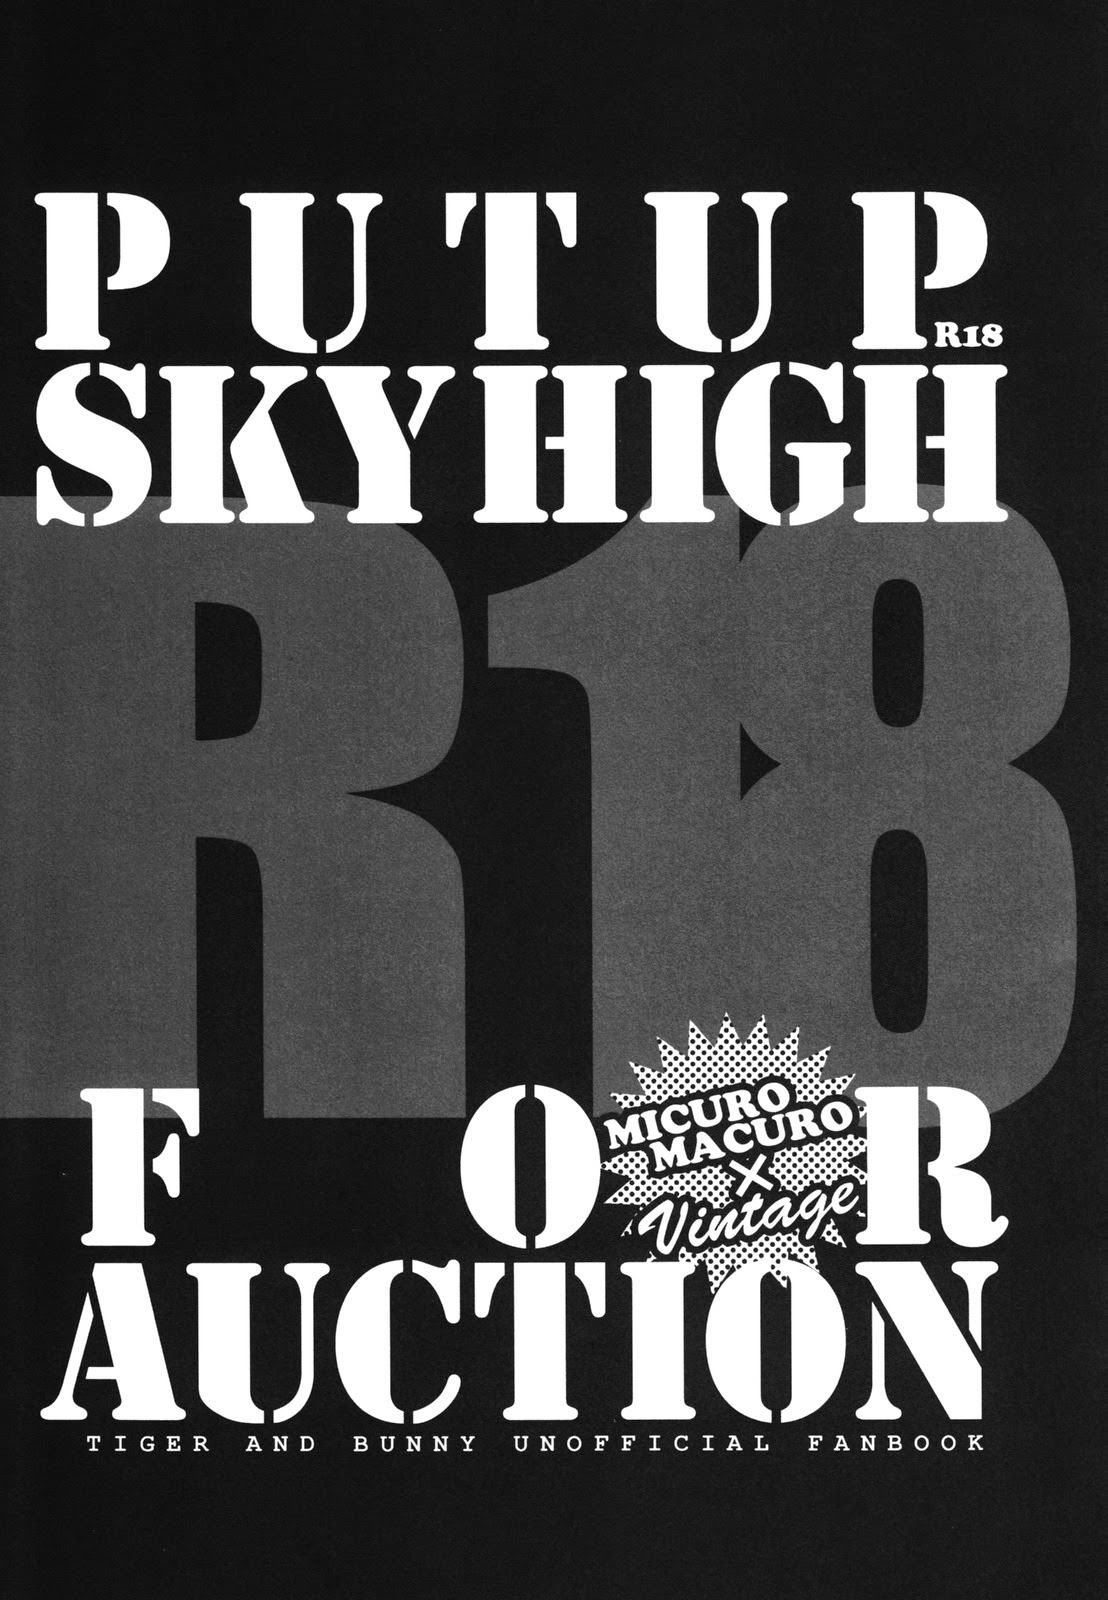 (C81) [MICROMACRO、Vintage (ヤマダサクラコ、サト)] PUT UP SKYHIGH FOR AUCTION (TIGER & BUNNY)